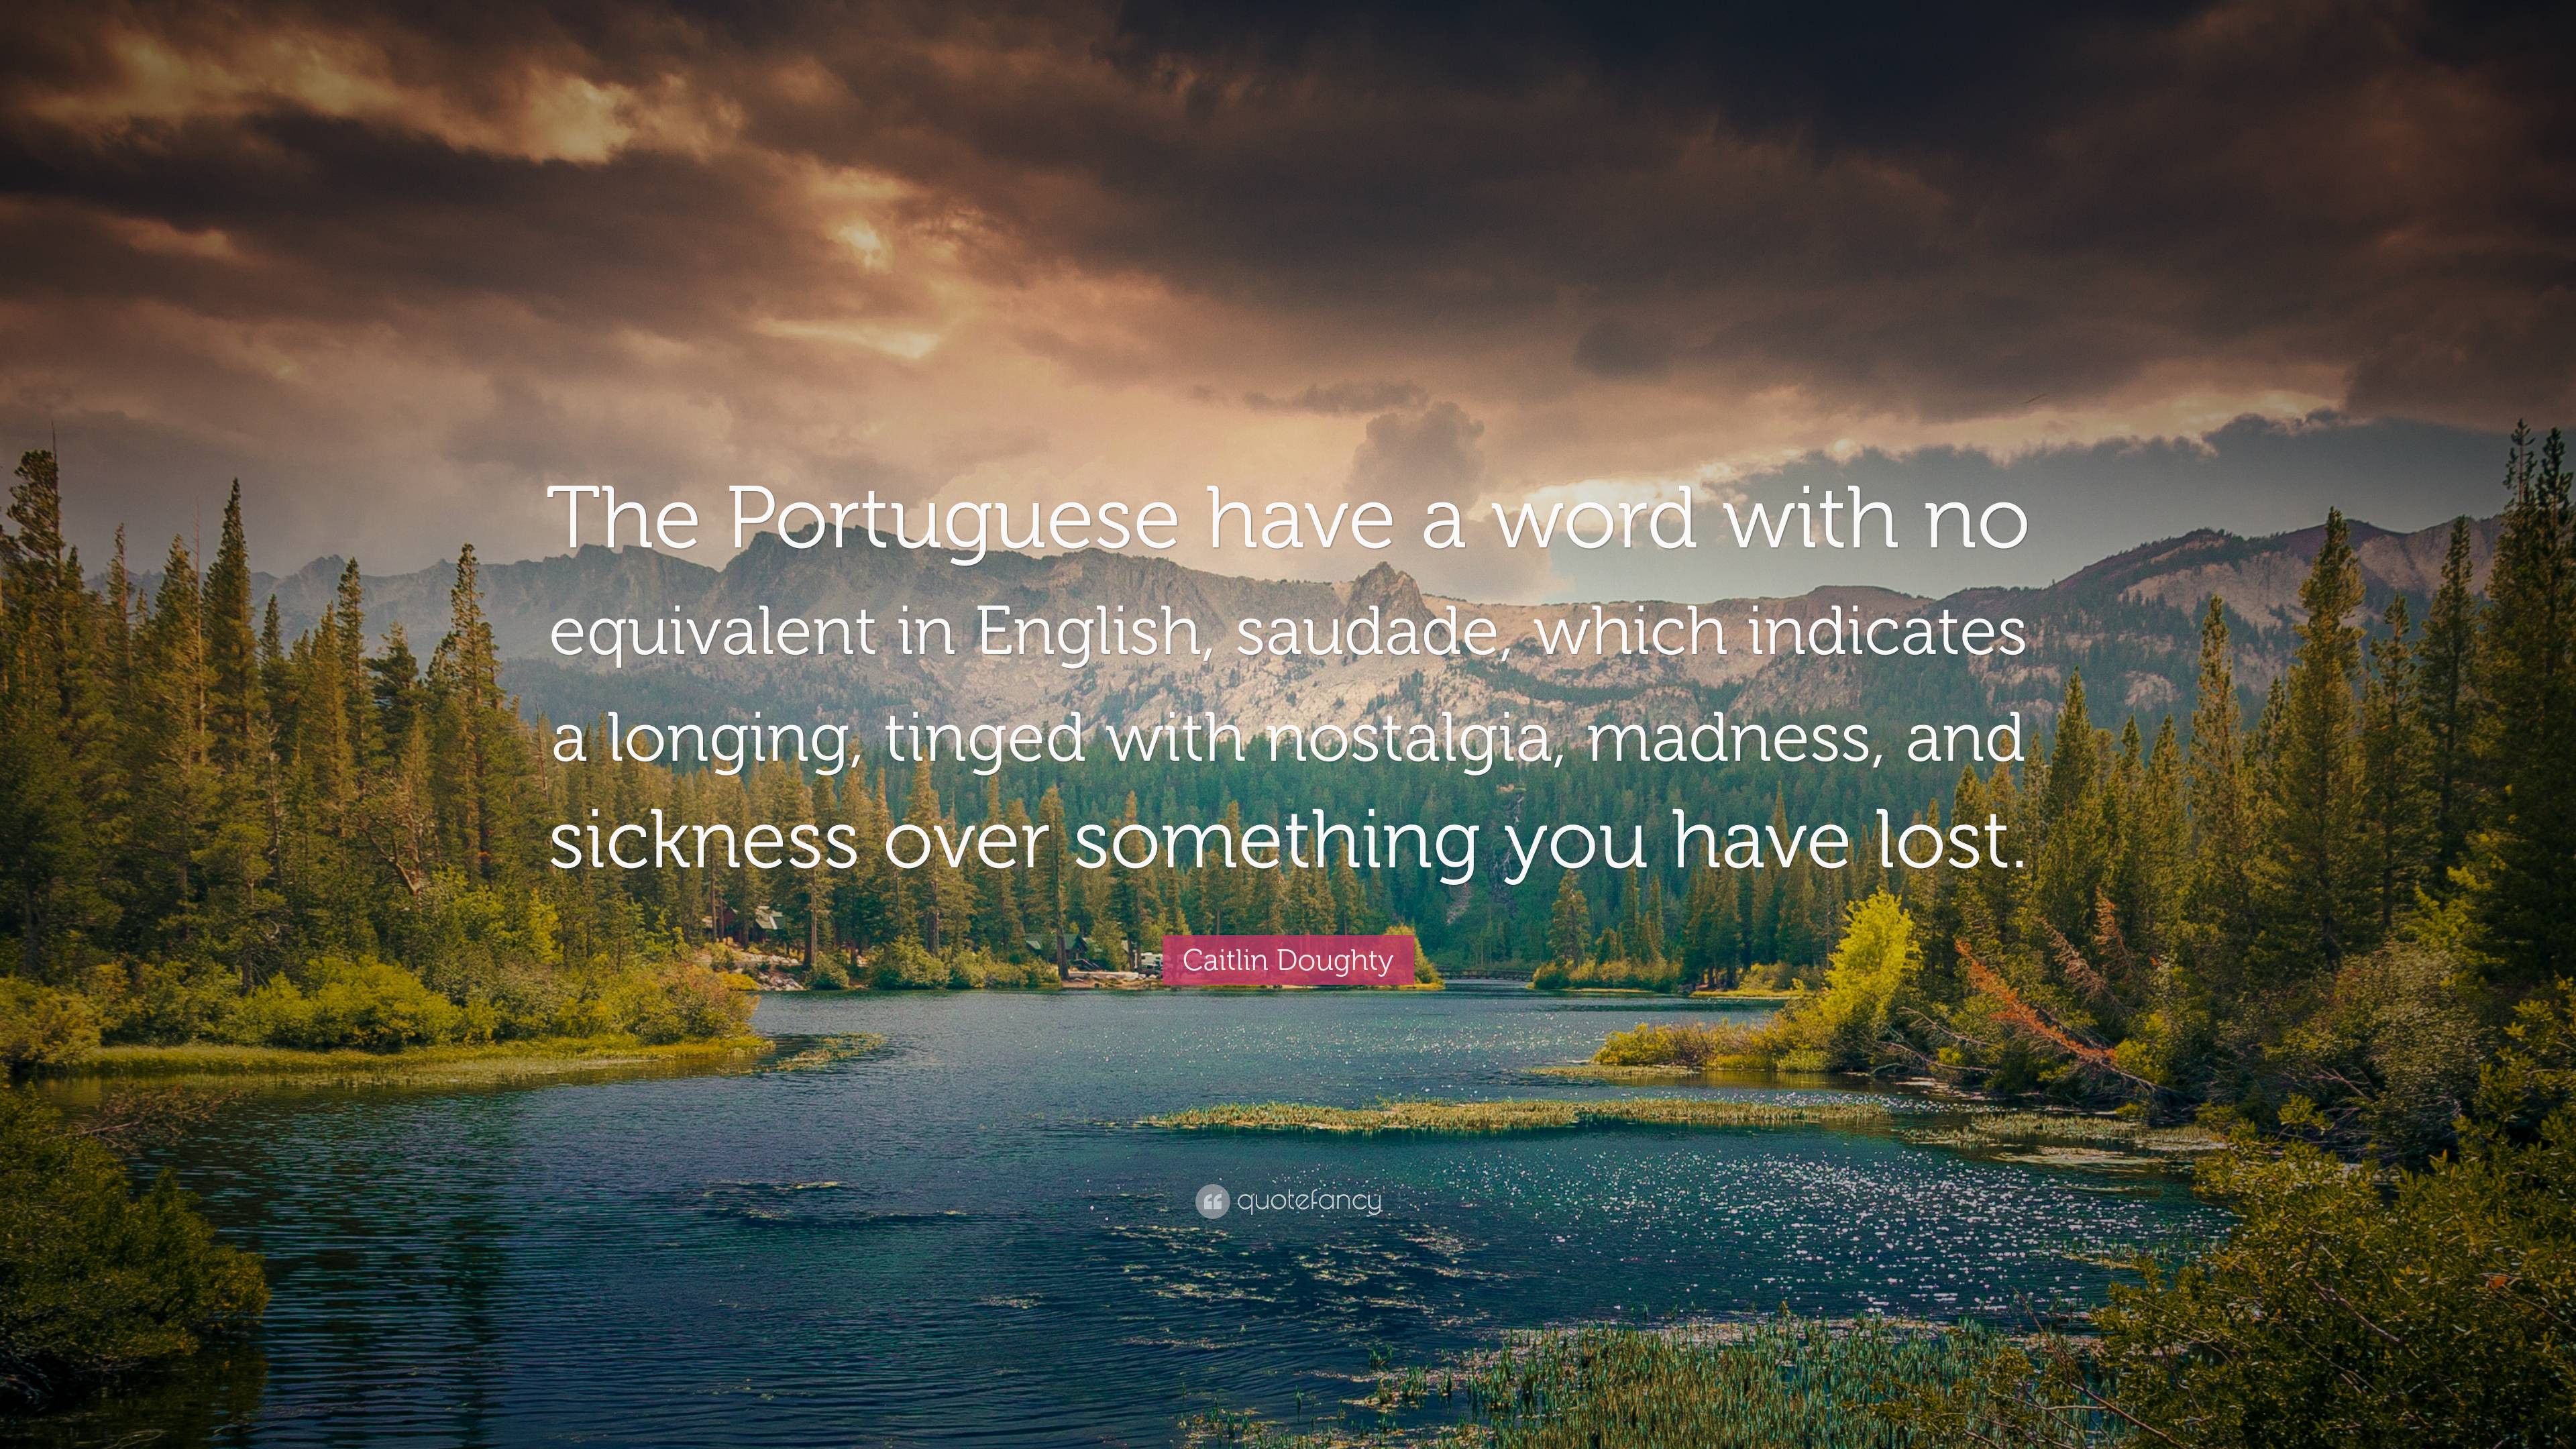 I Wrote This For You — 107b: Saudade is a unique Portuguese word that